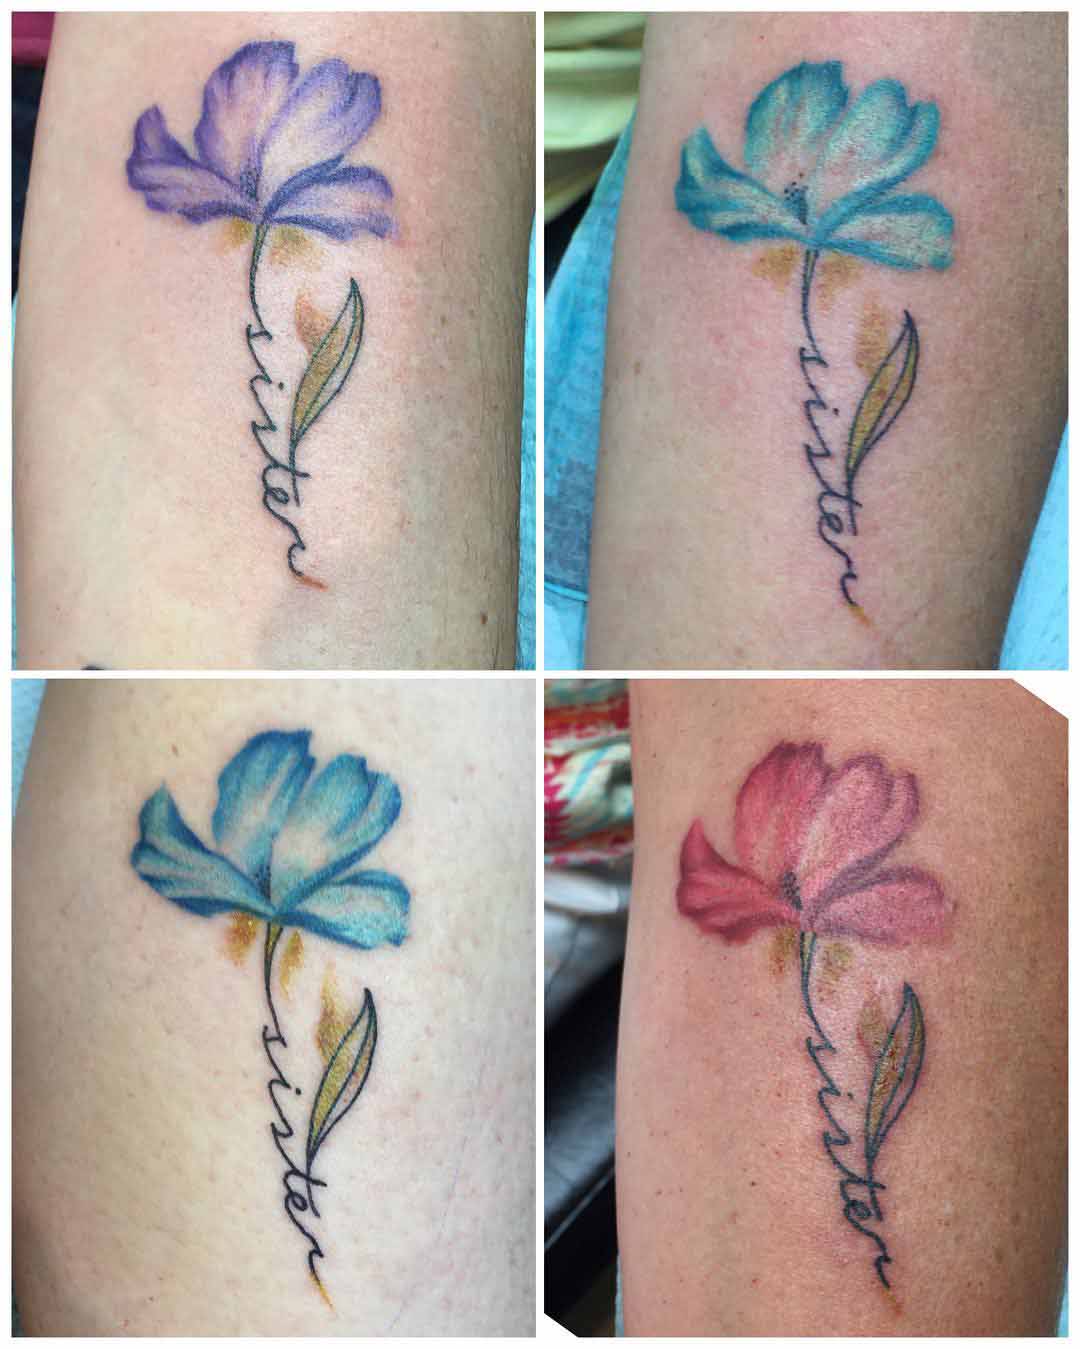 Sister Tattoos for 4 by Brucetat2